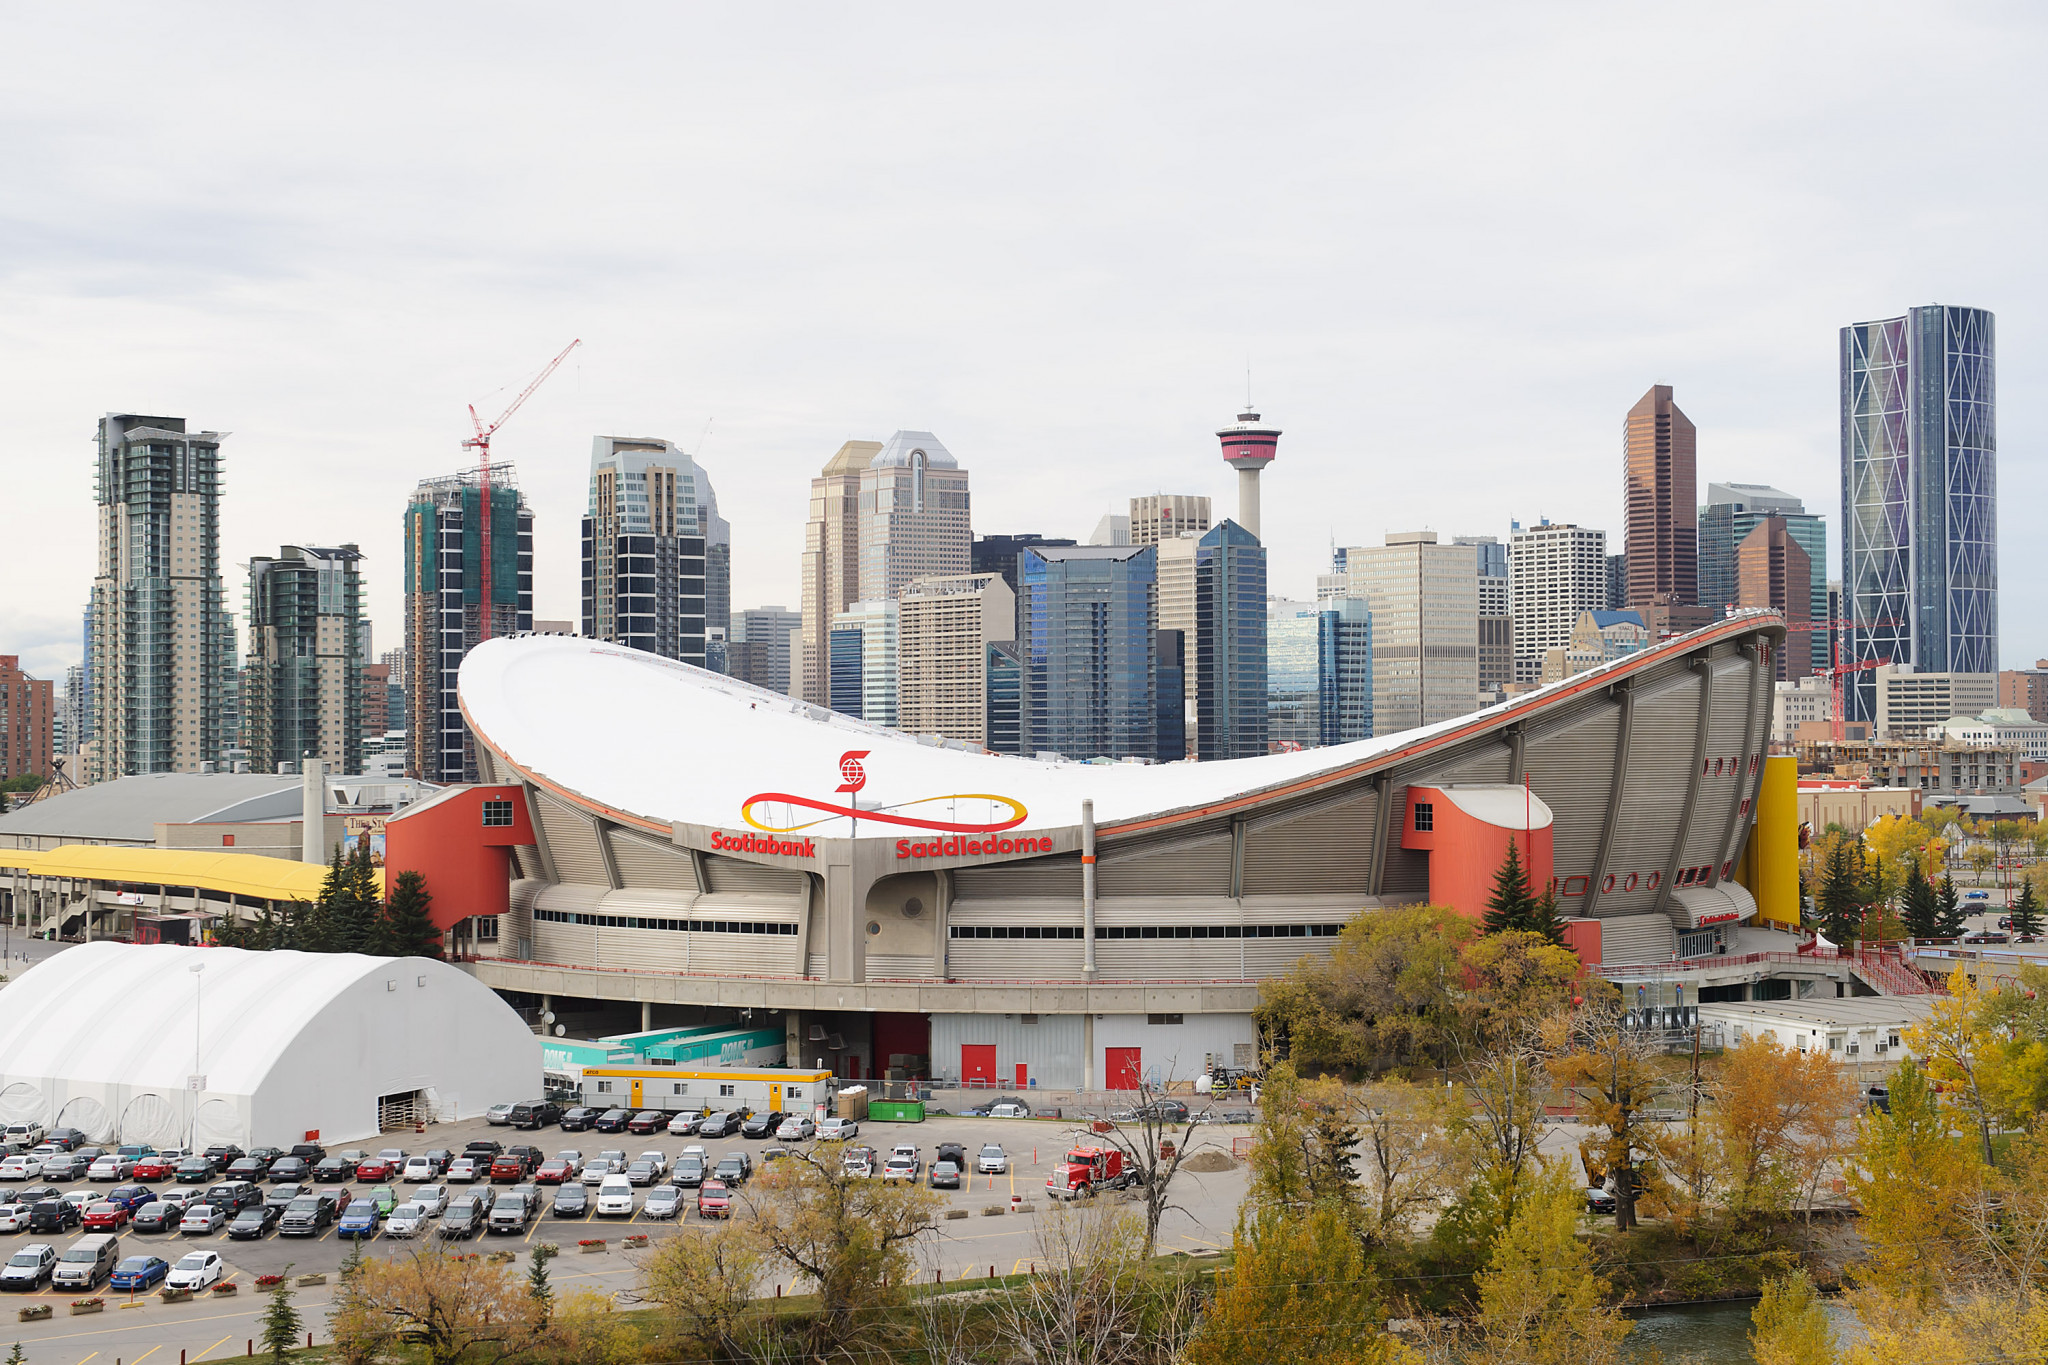 Calgary spent millions of dollars in 2018 preparing a potential bid for the 2026 Winter Olympic and Paralympic Games, only for it to be voted down in a municipal plebiscite ©Getty Images